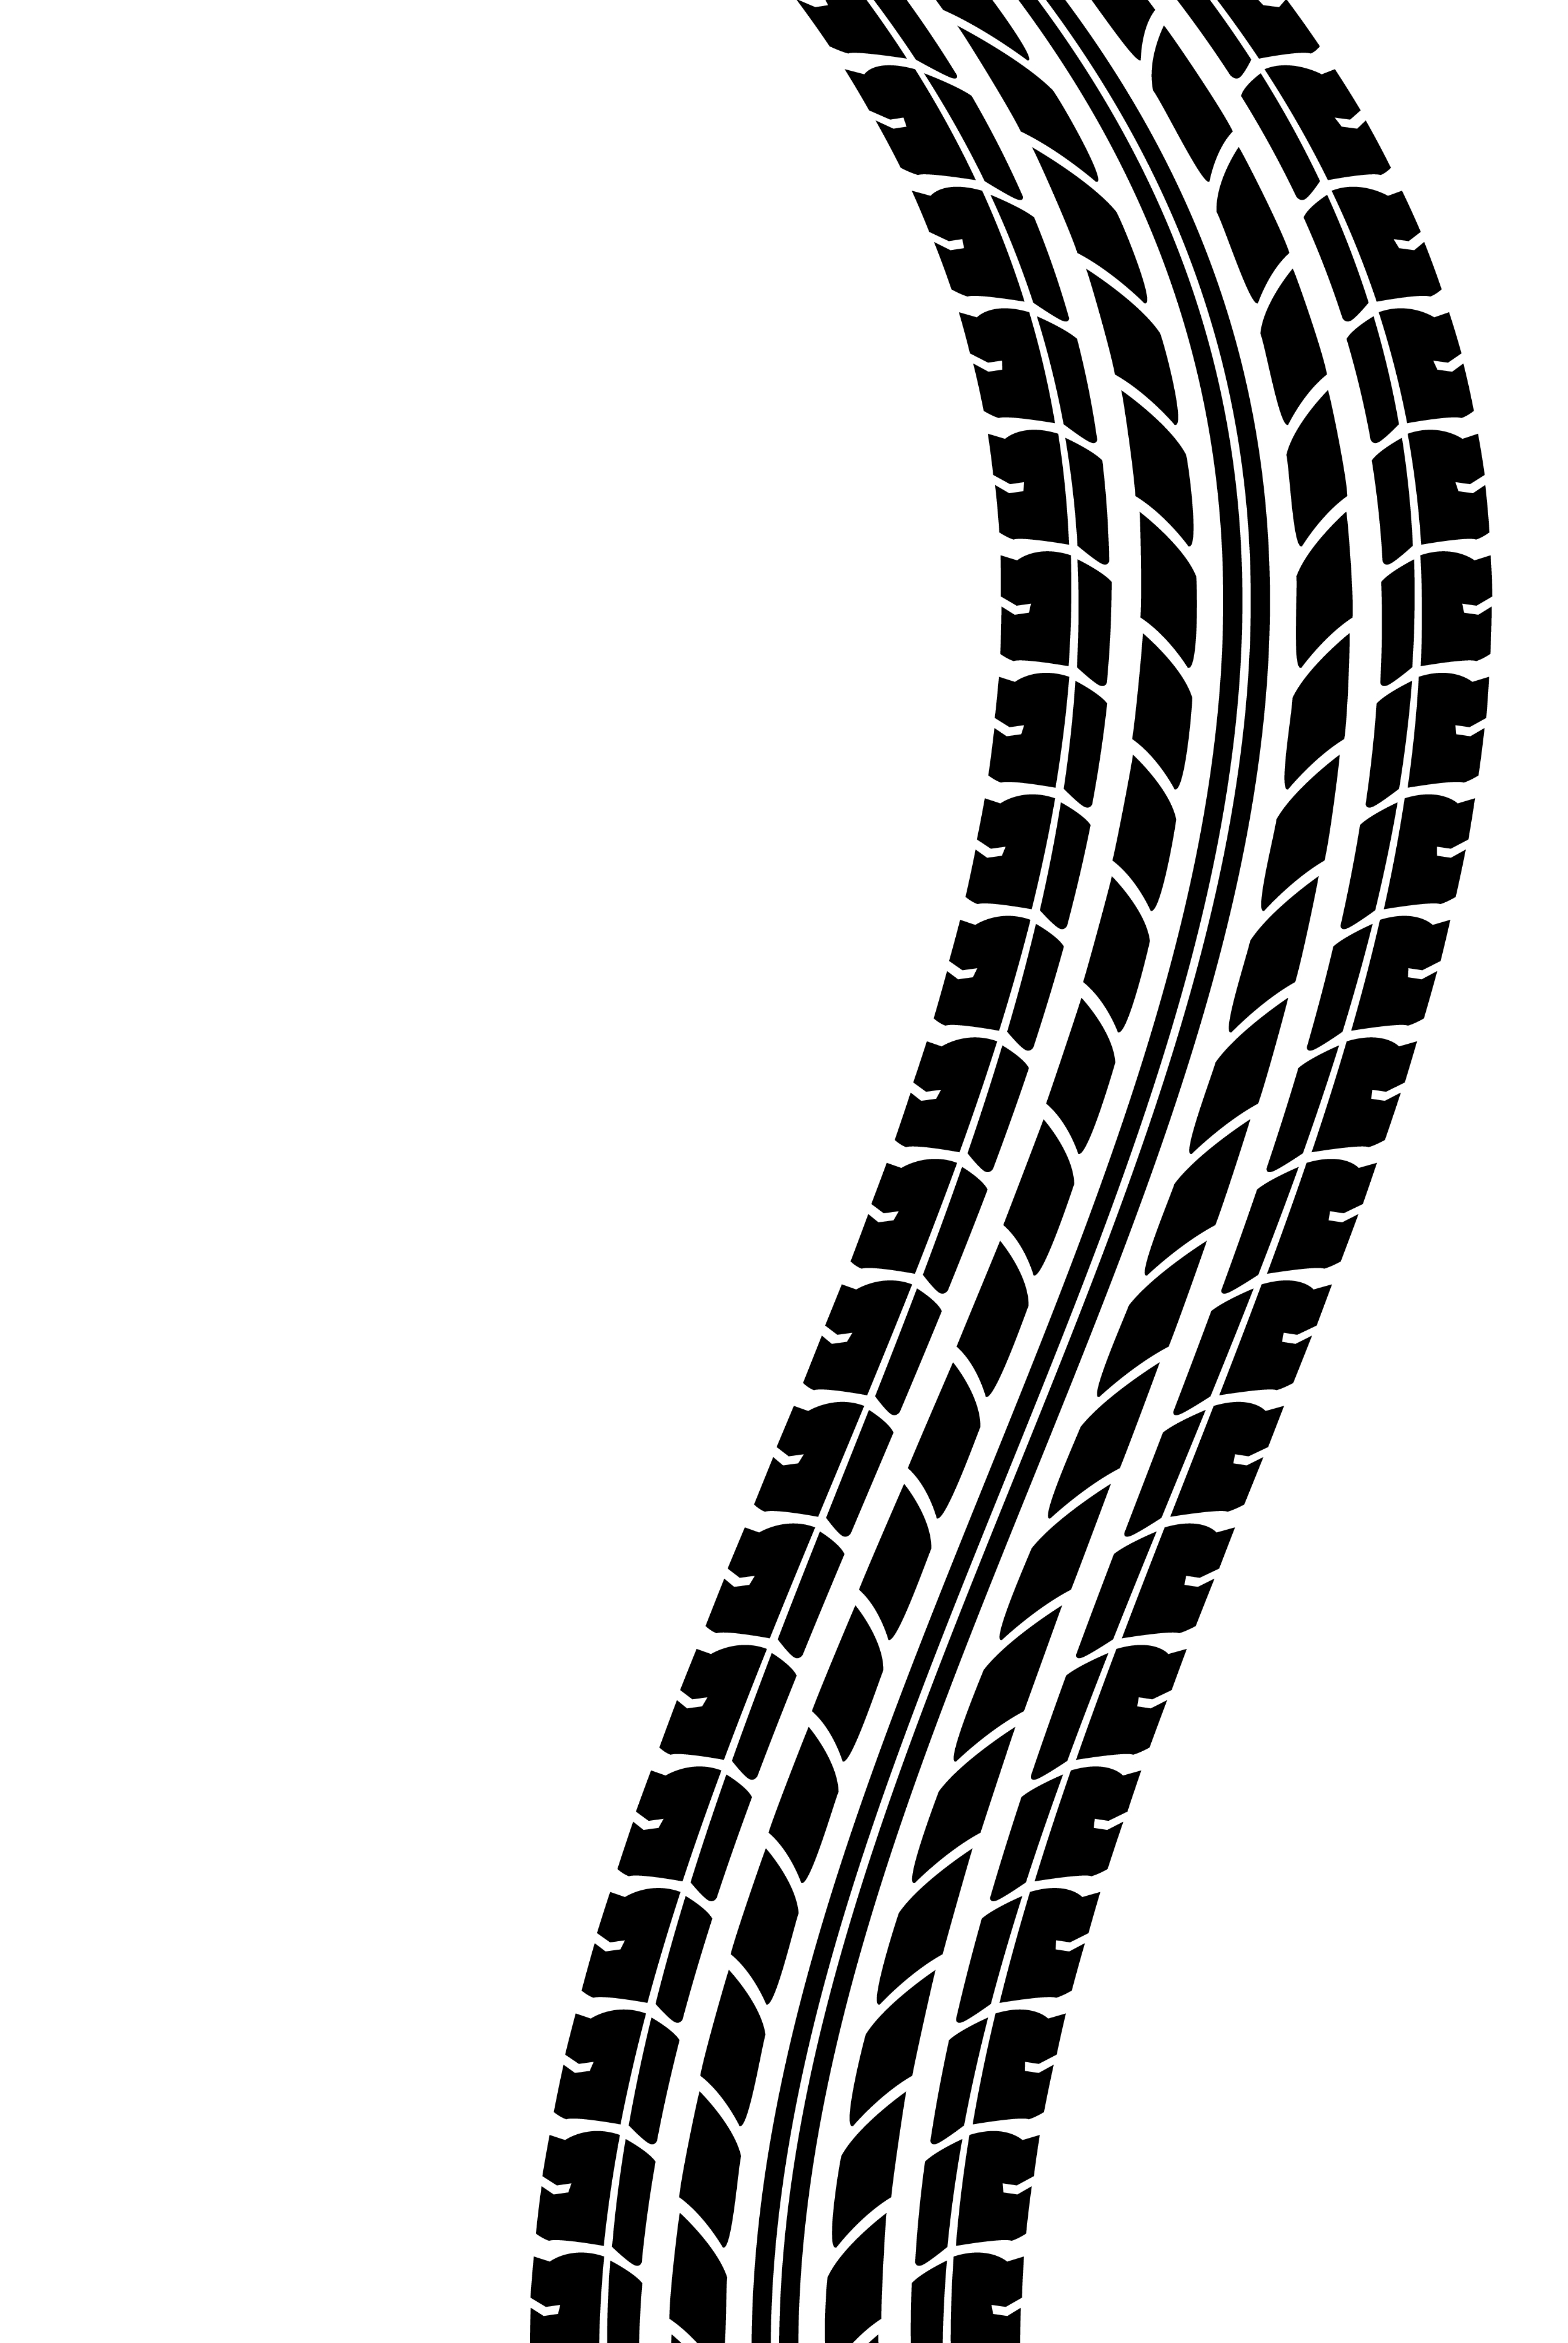 Tire Pictures - ClipArt Best